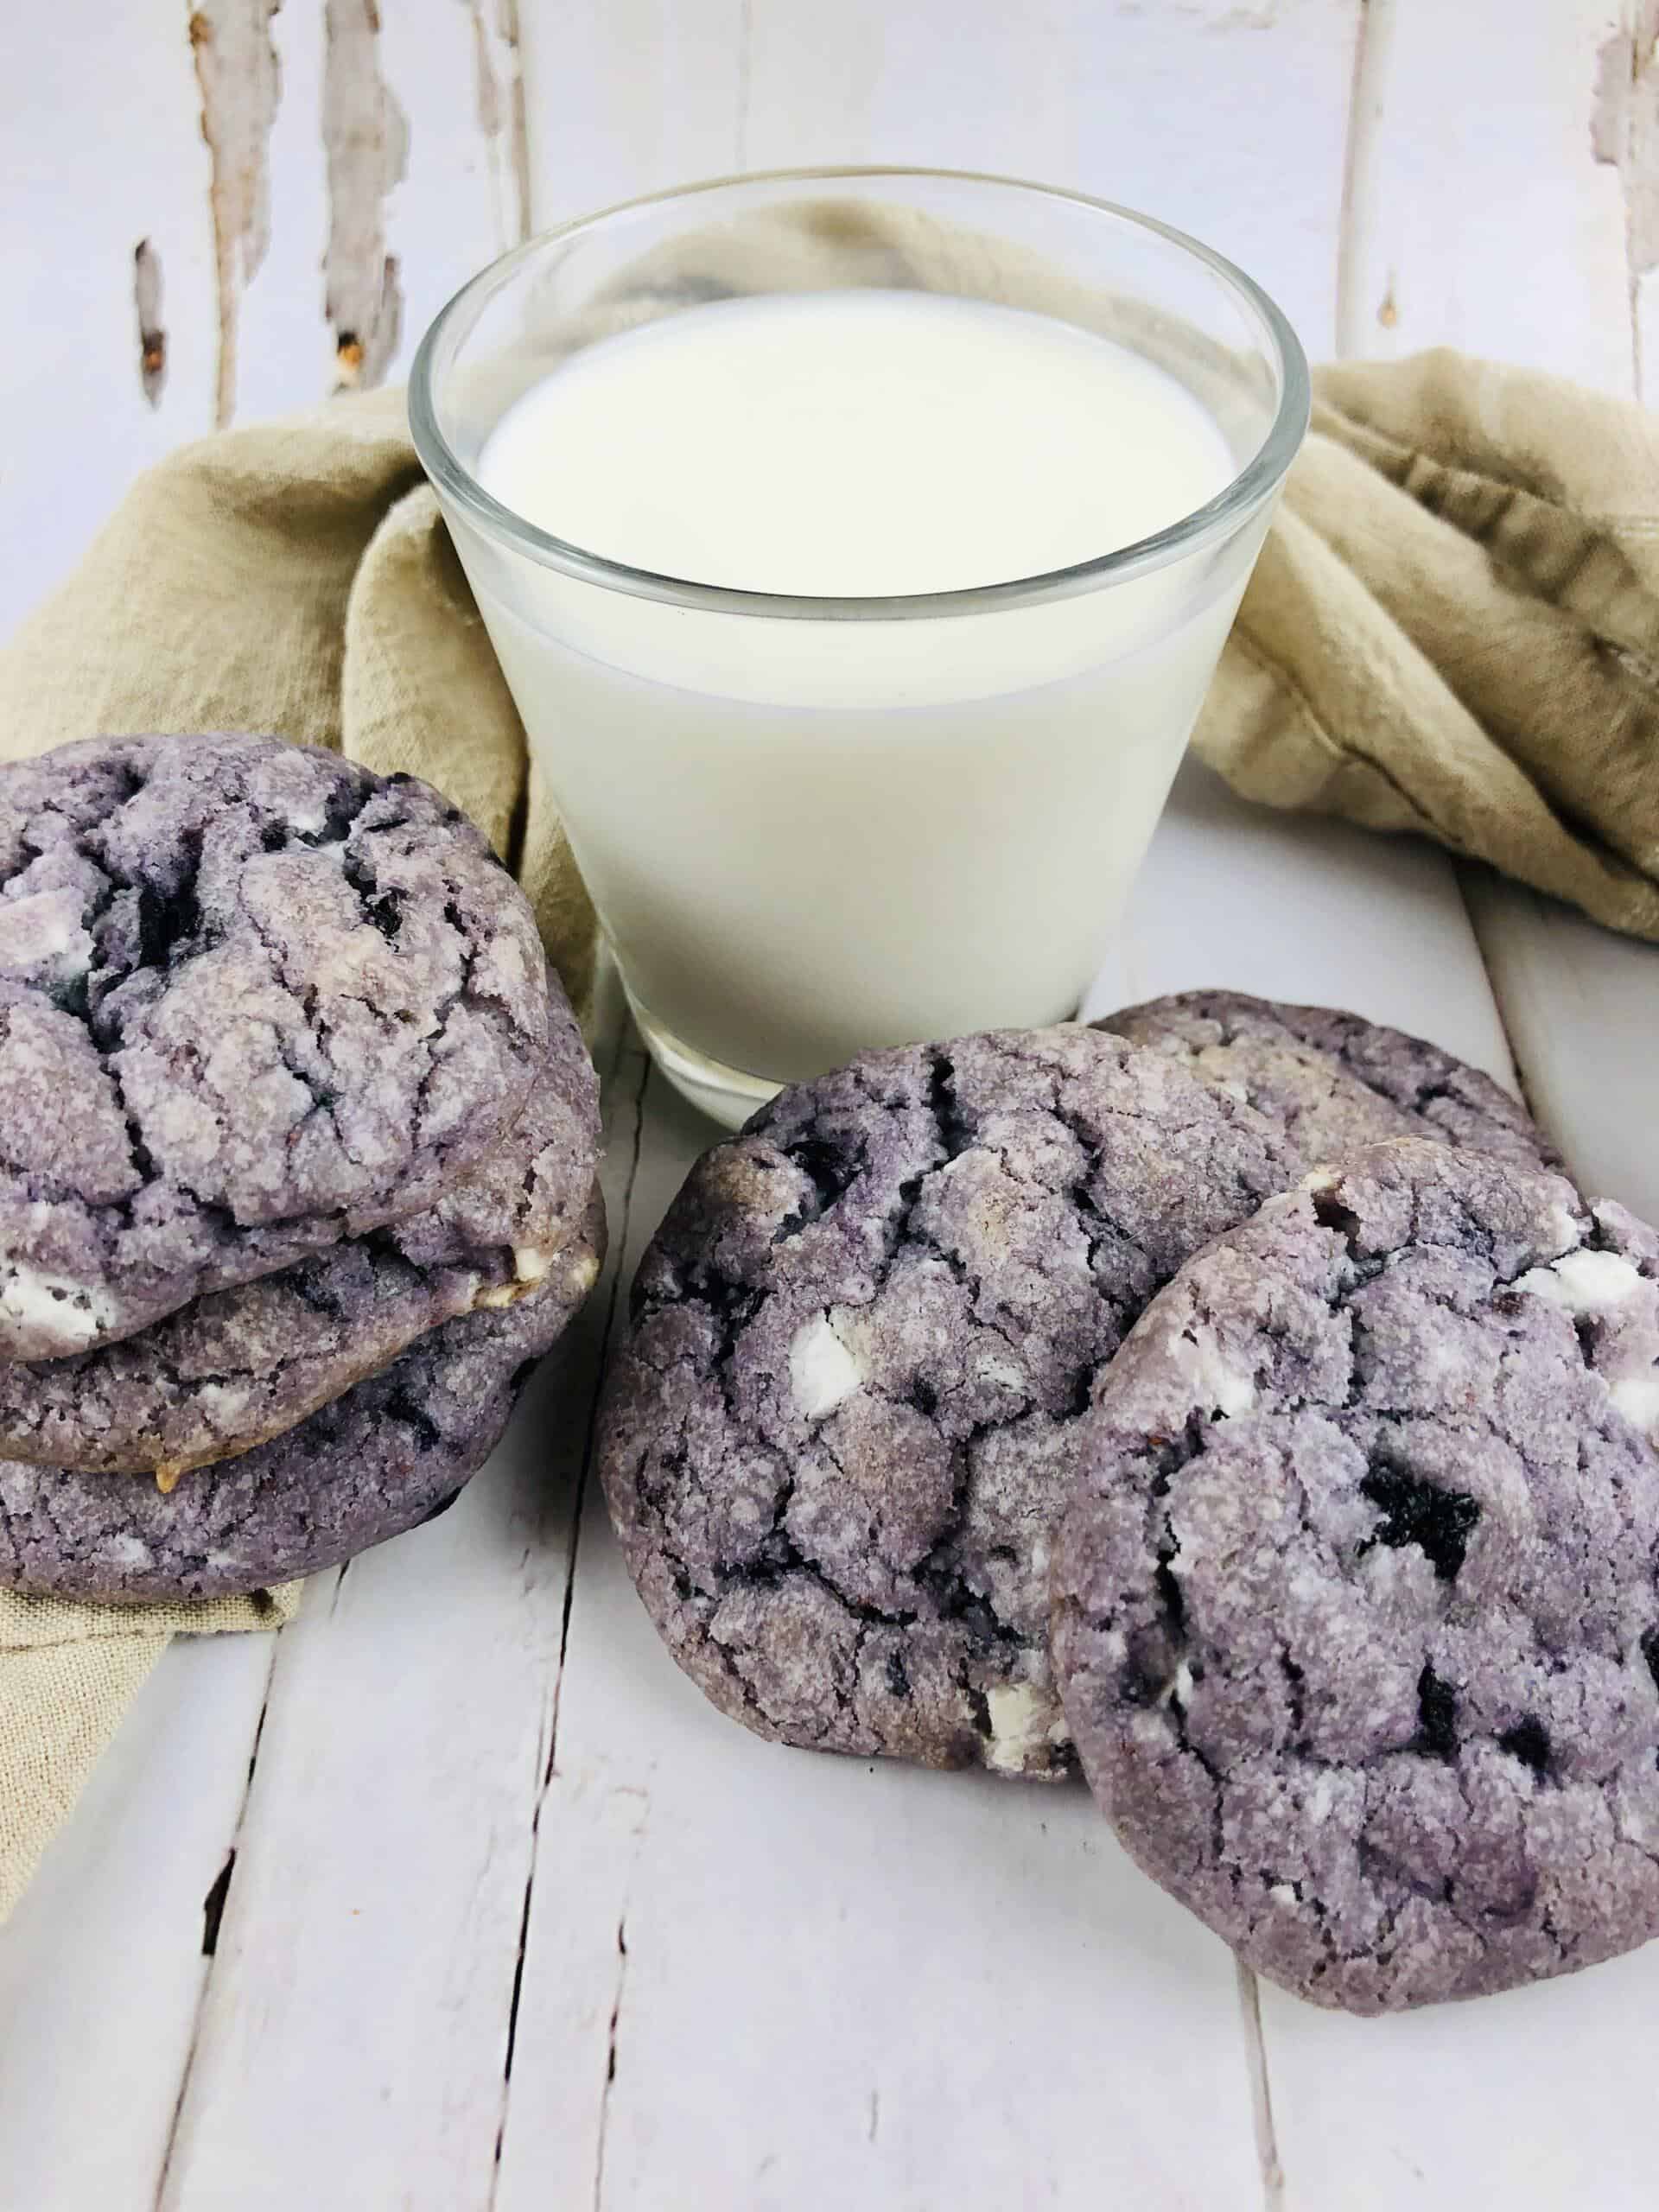 blueberry white chocolate cookies with milk